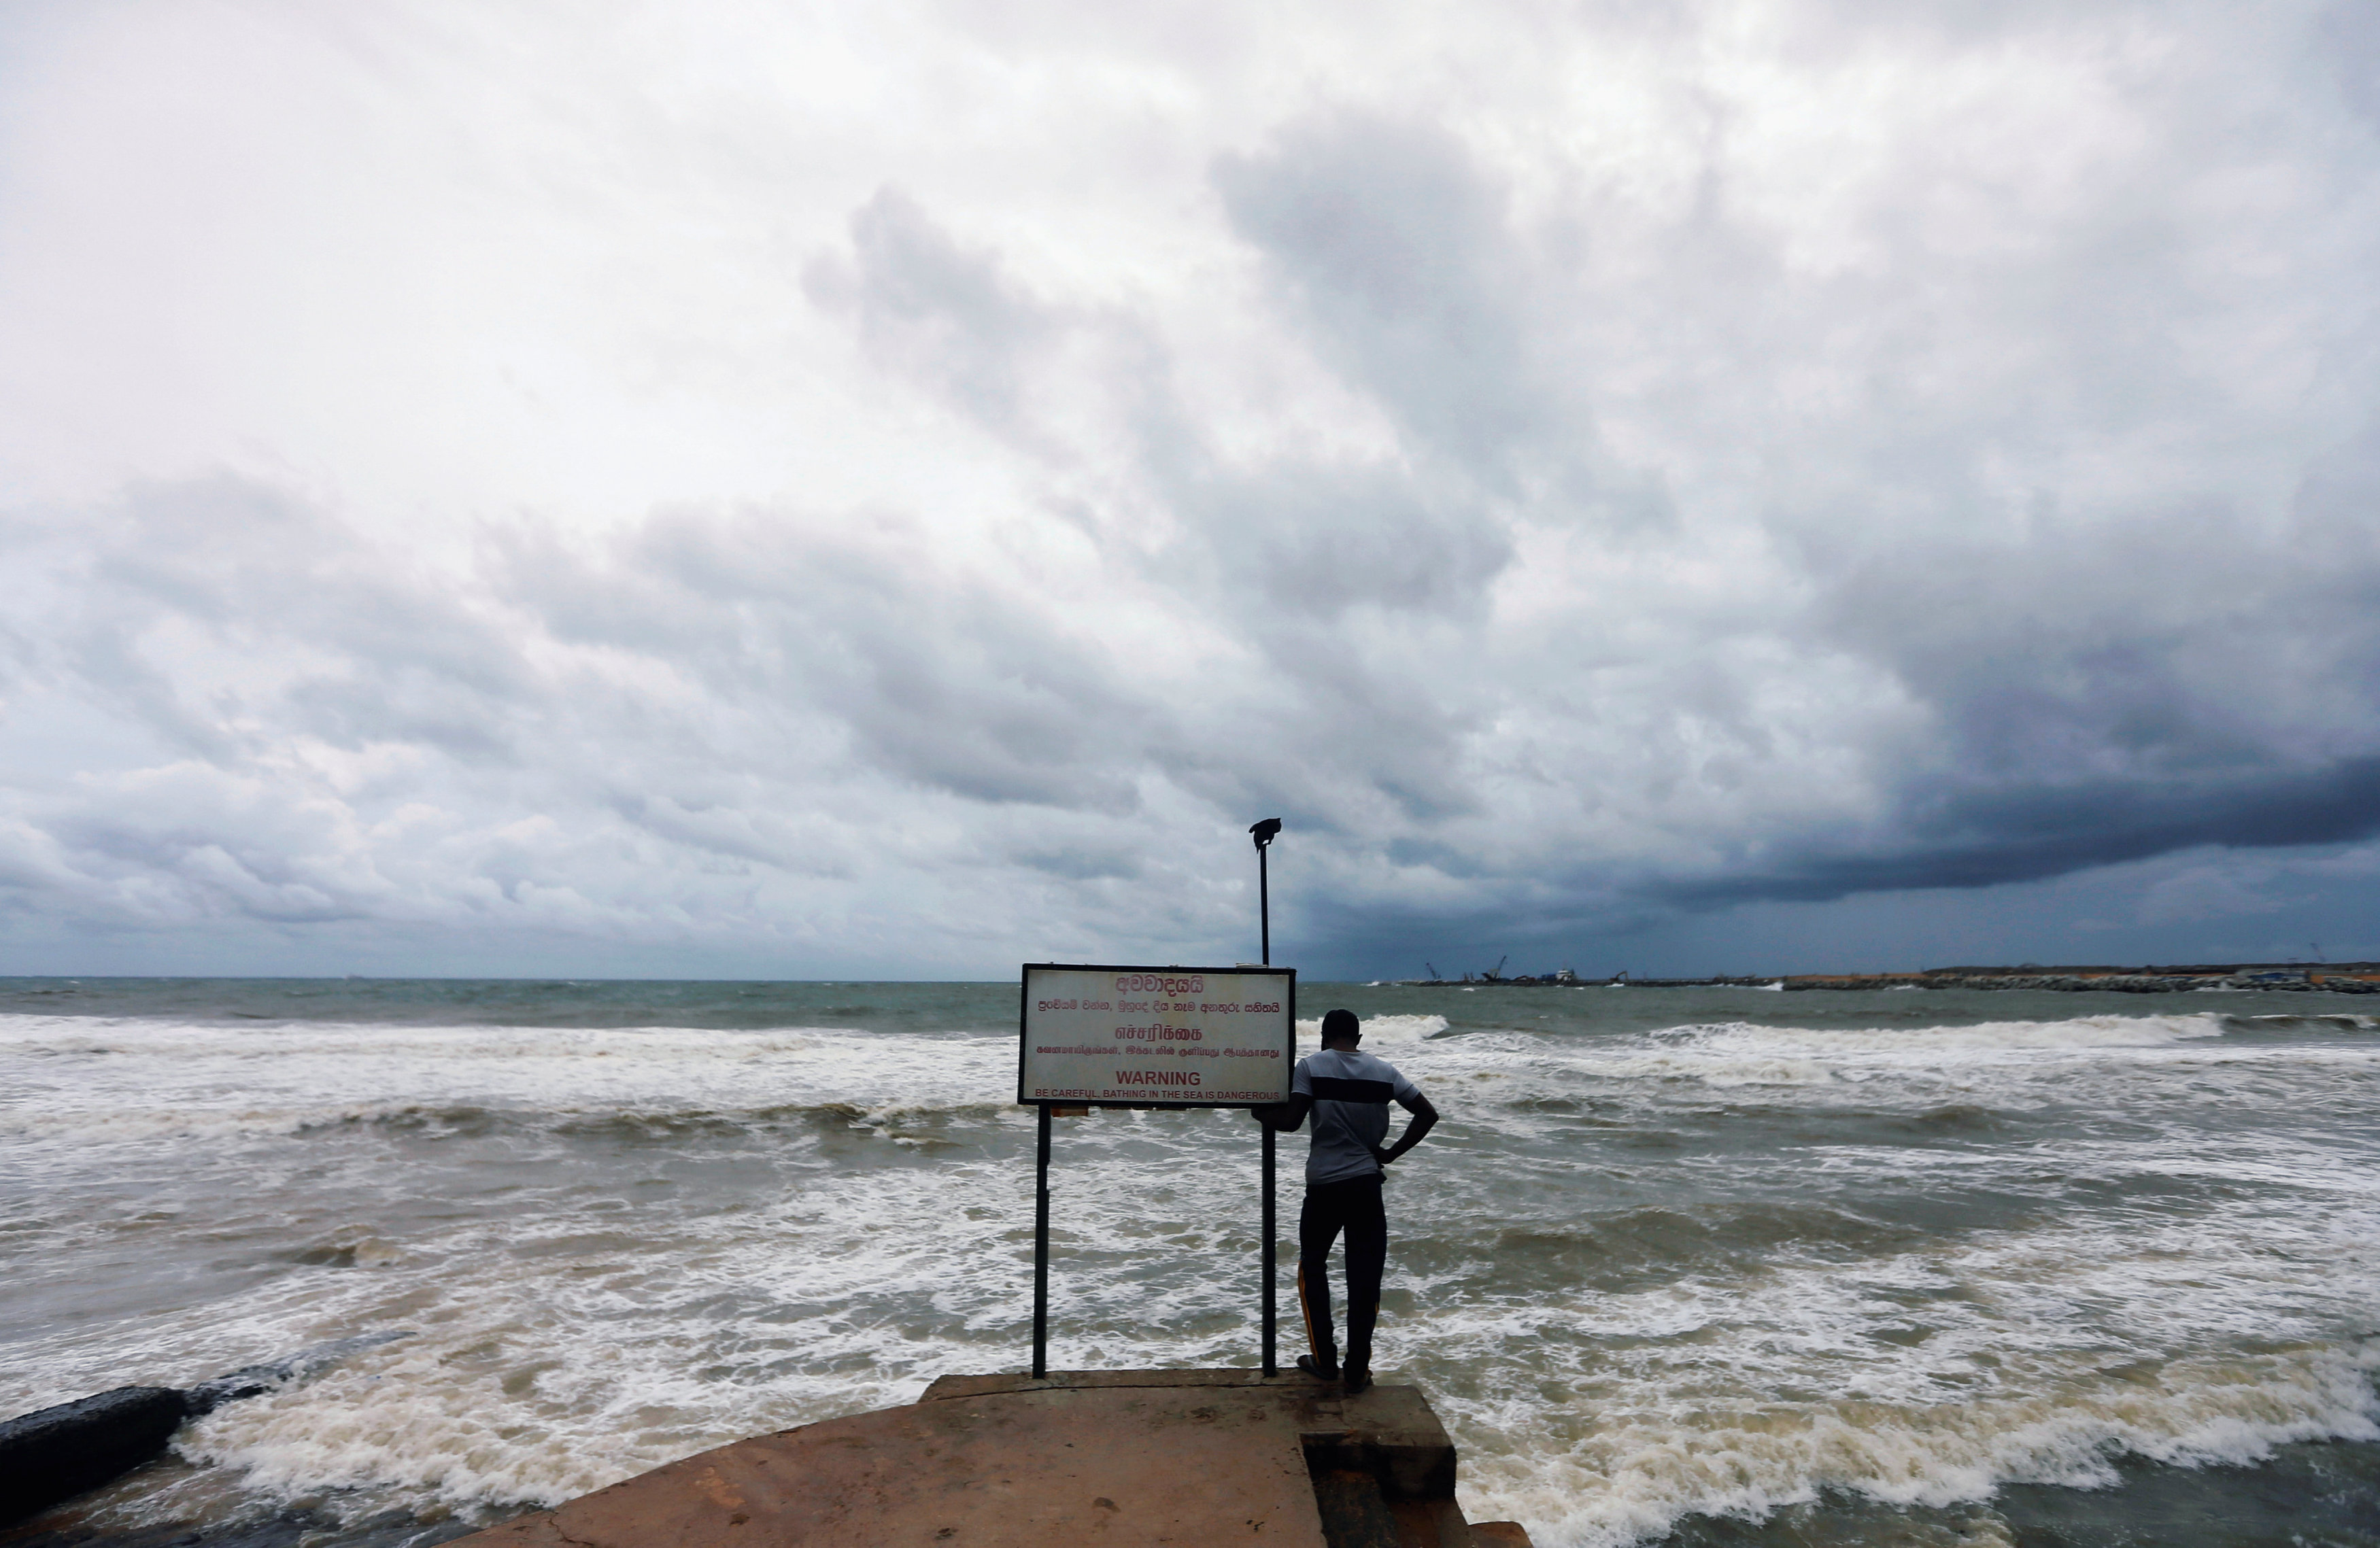 A man looks at the rough sea as rainy clouds gather above during the monsoon period in Colombo